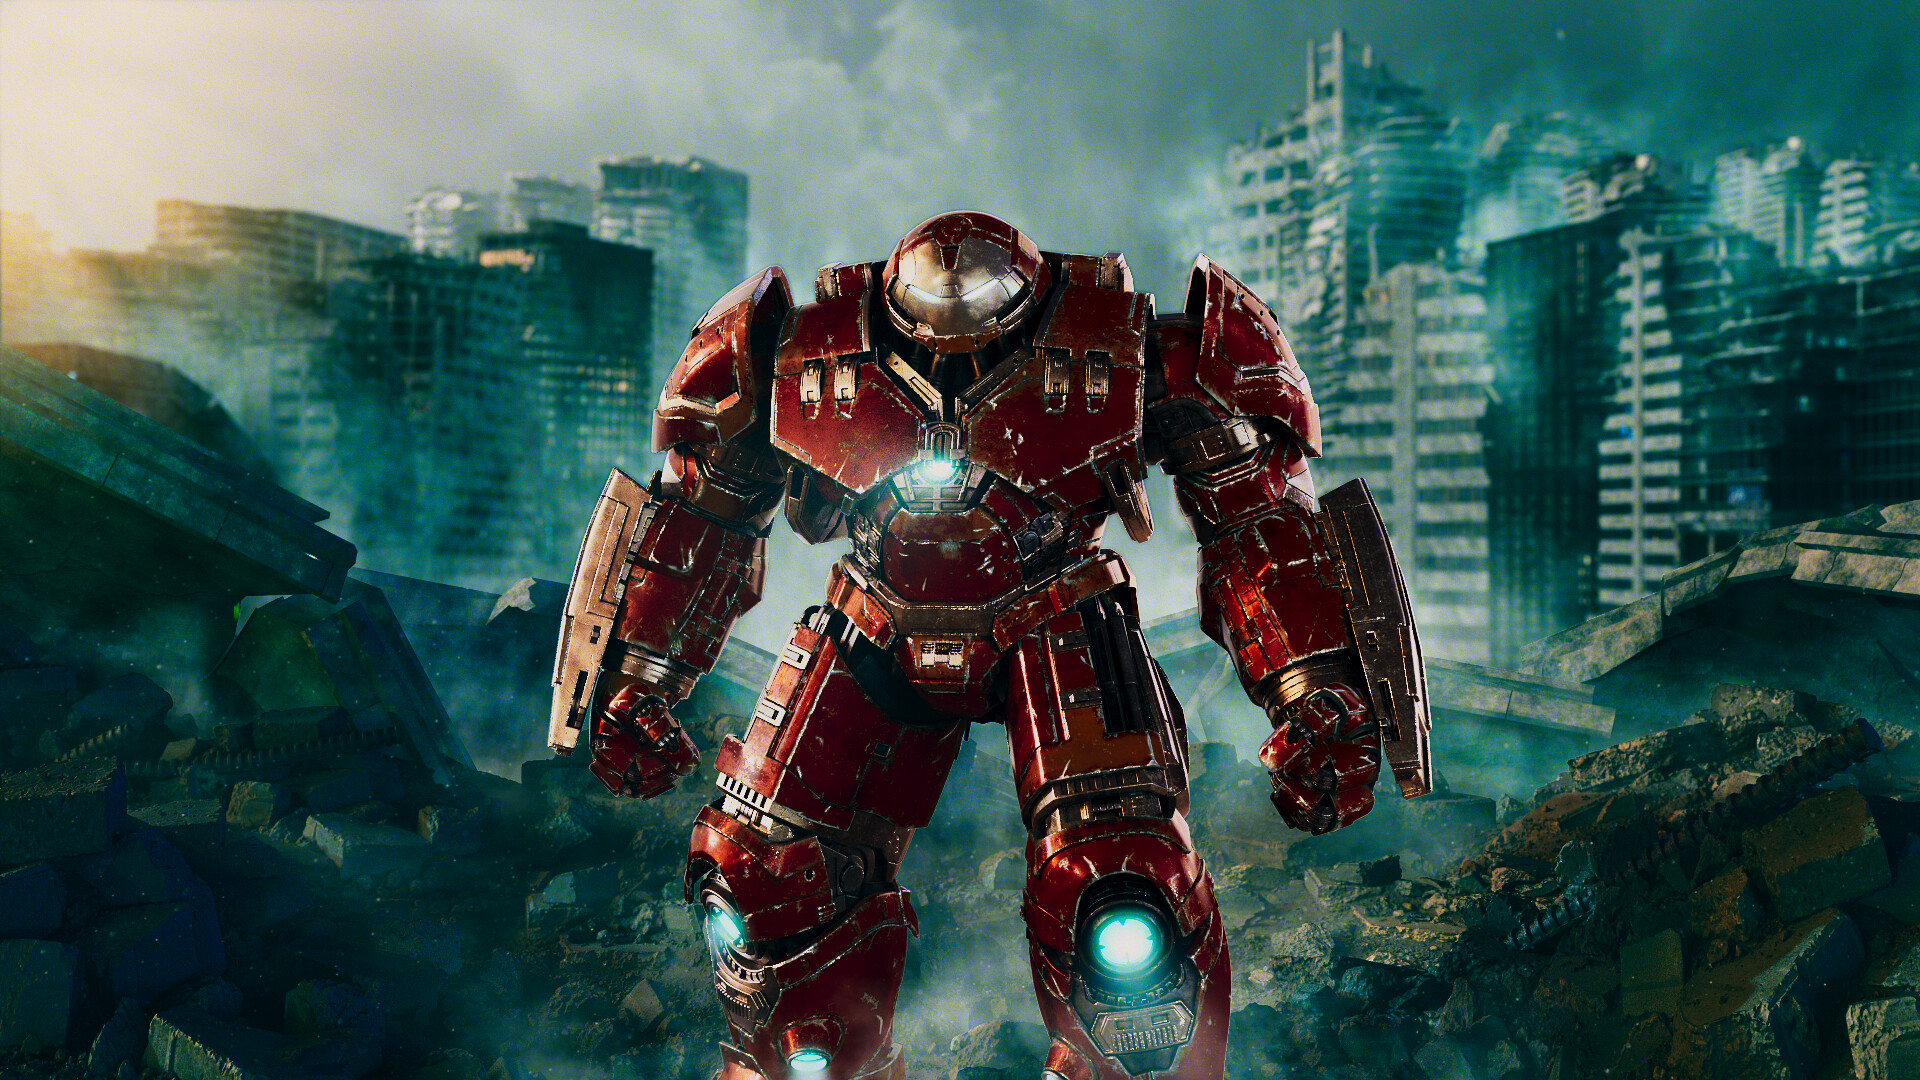 Hulkbuster and the destroyed city.